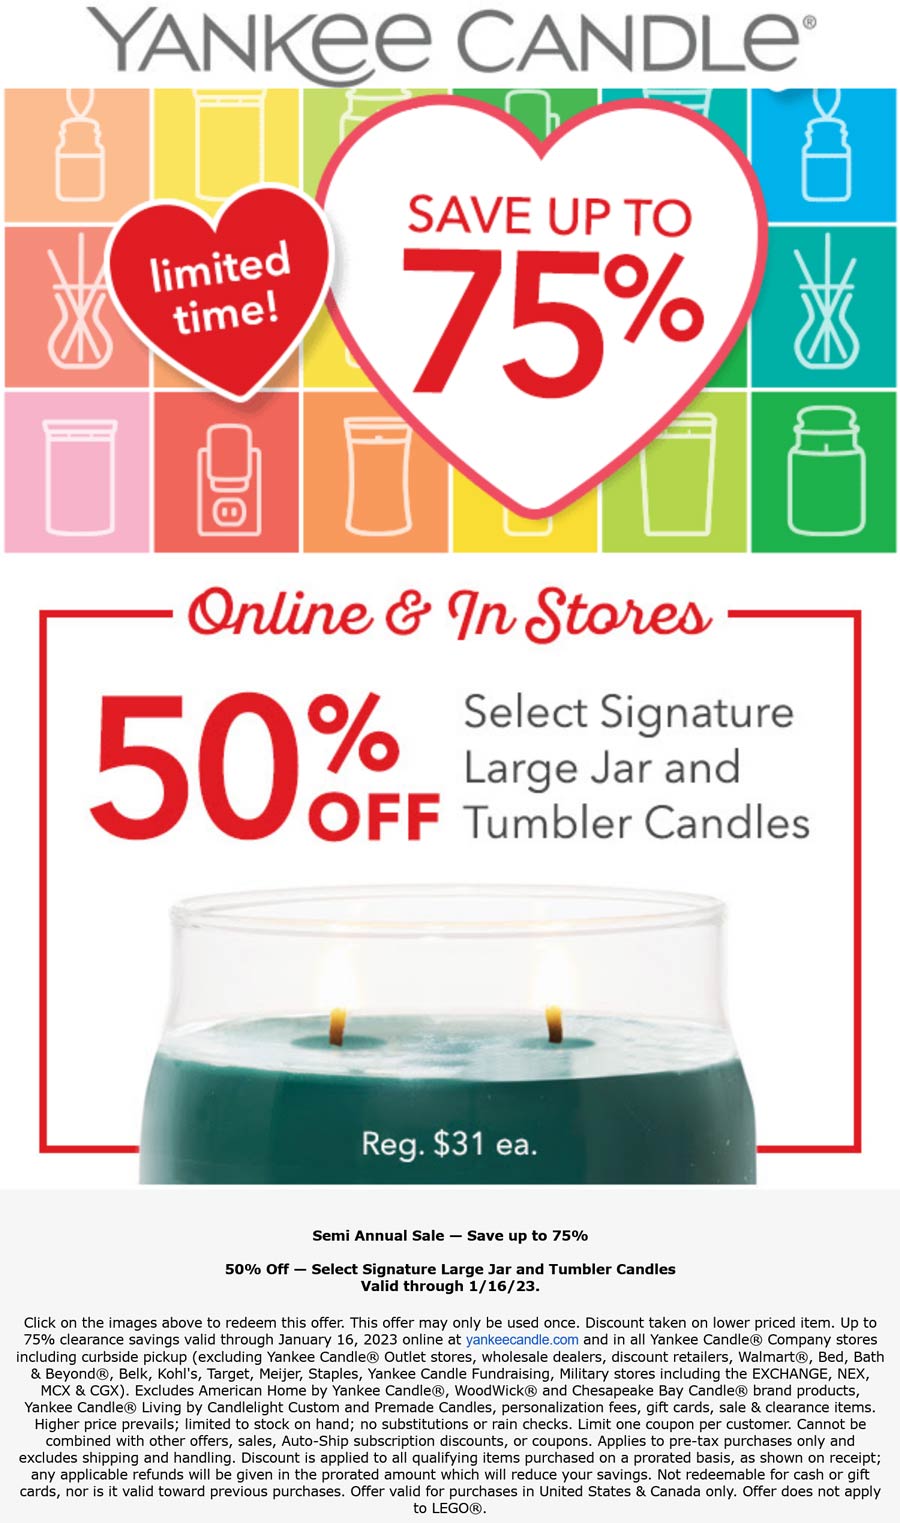 Yankee Candle stores Coupon  50% off large candles at Yankee Candle #yankeecandle 